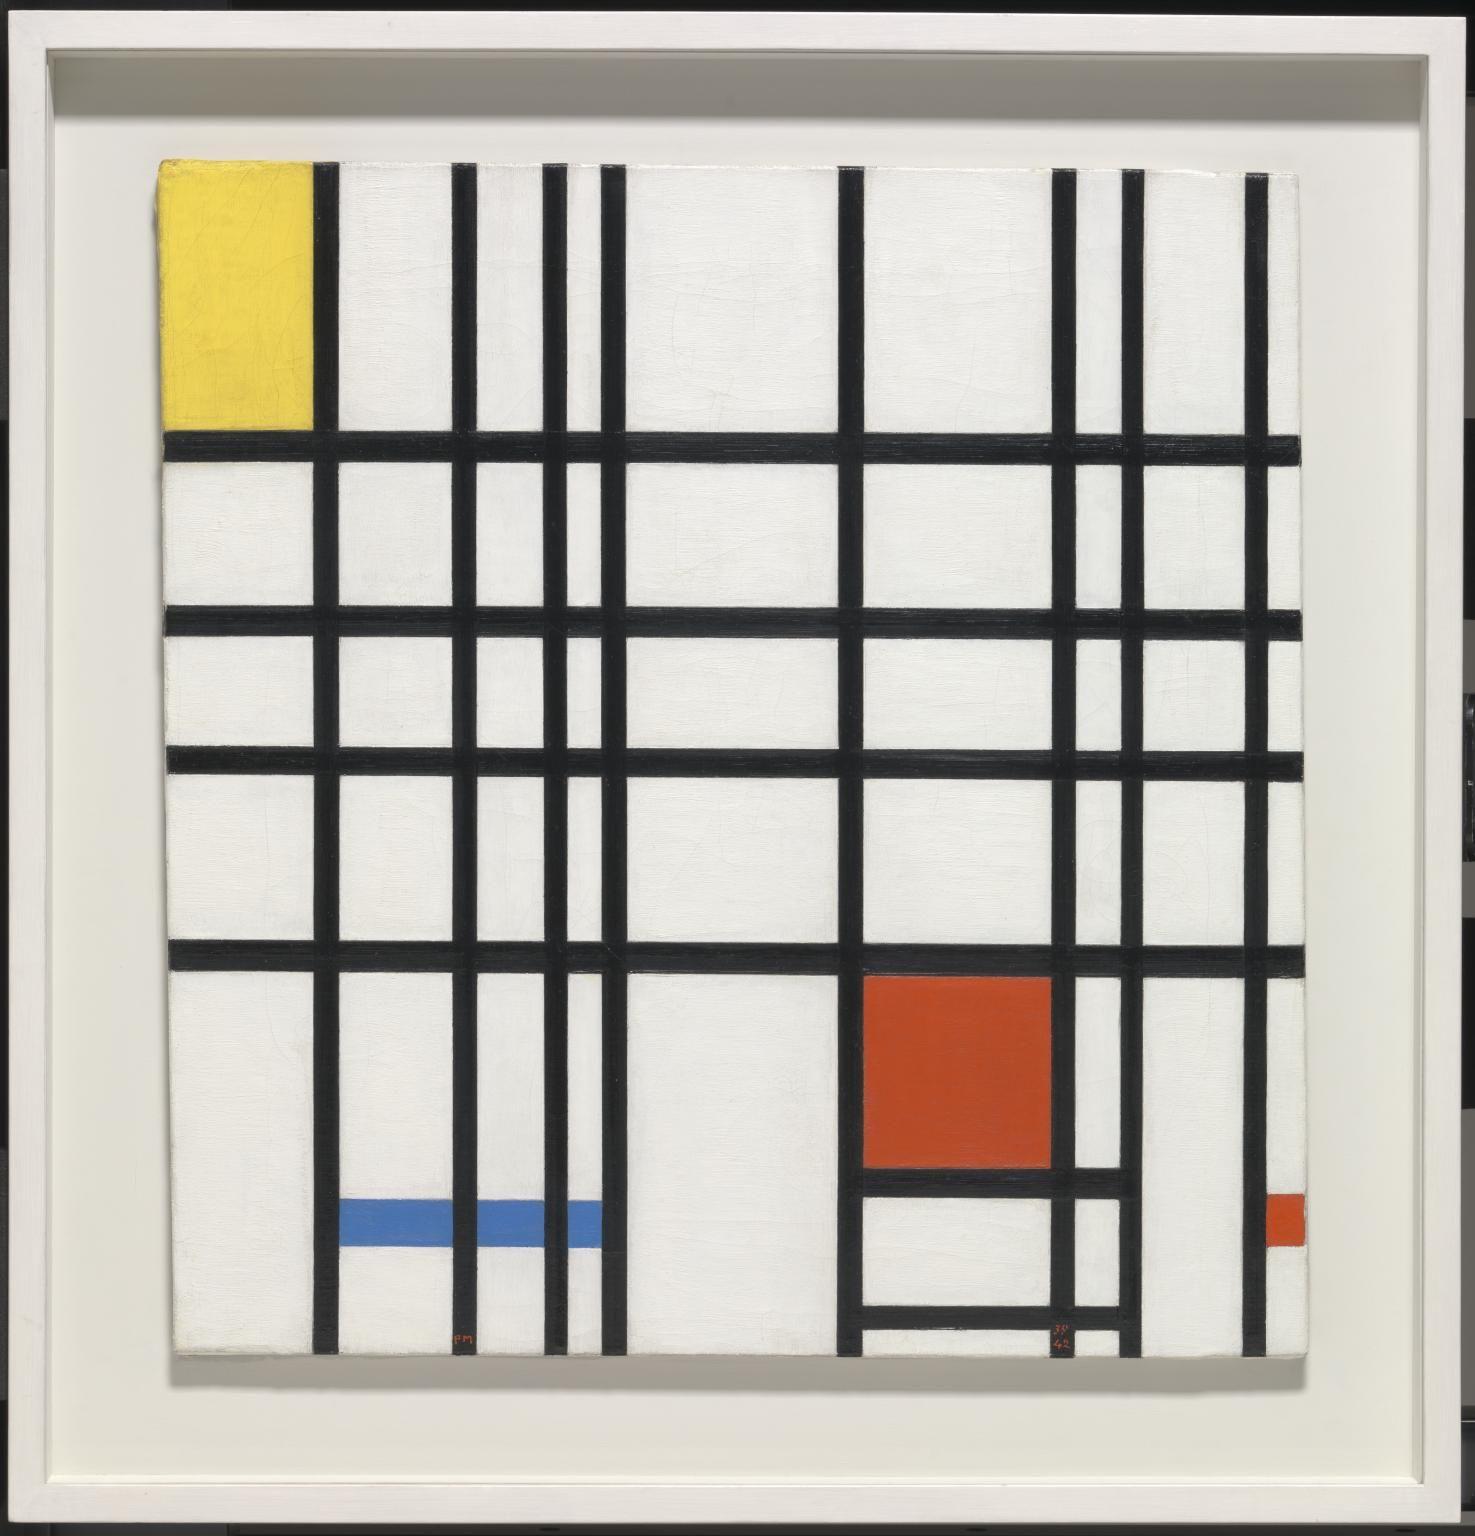 Red Yellow Blue Logo - Composition with Yellow, Blue and Red', Piet Mondrian, 1937-42 | Tate